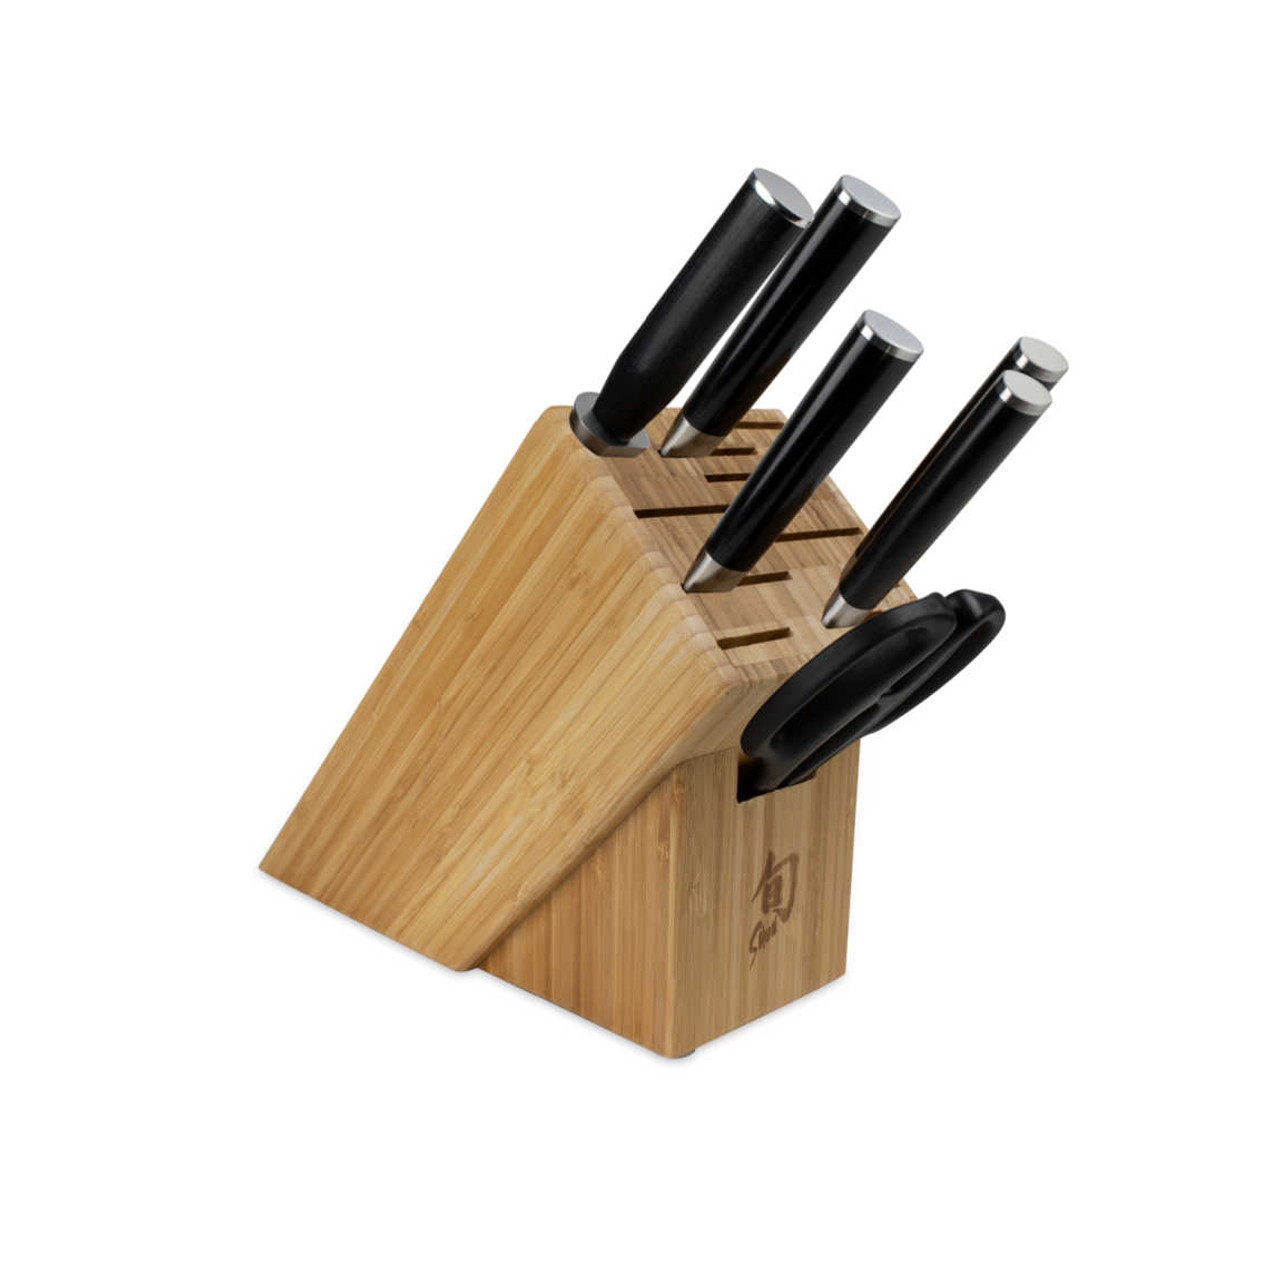 https://cdn11.bigcommerce.com/s-hccytny0od/images/stencil/1280x1280/products/5888/26467/Shun_Classic_7-Piece_Essential_Block_Set_1__67095.1698946760.jpg?c=2?imbypass=on